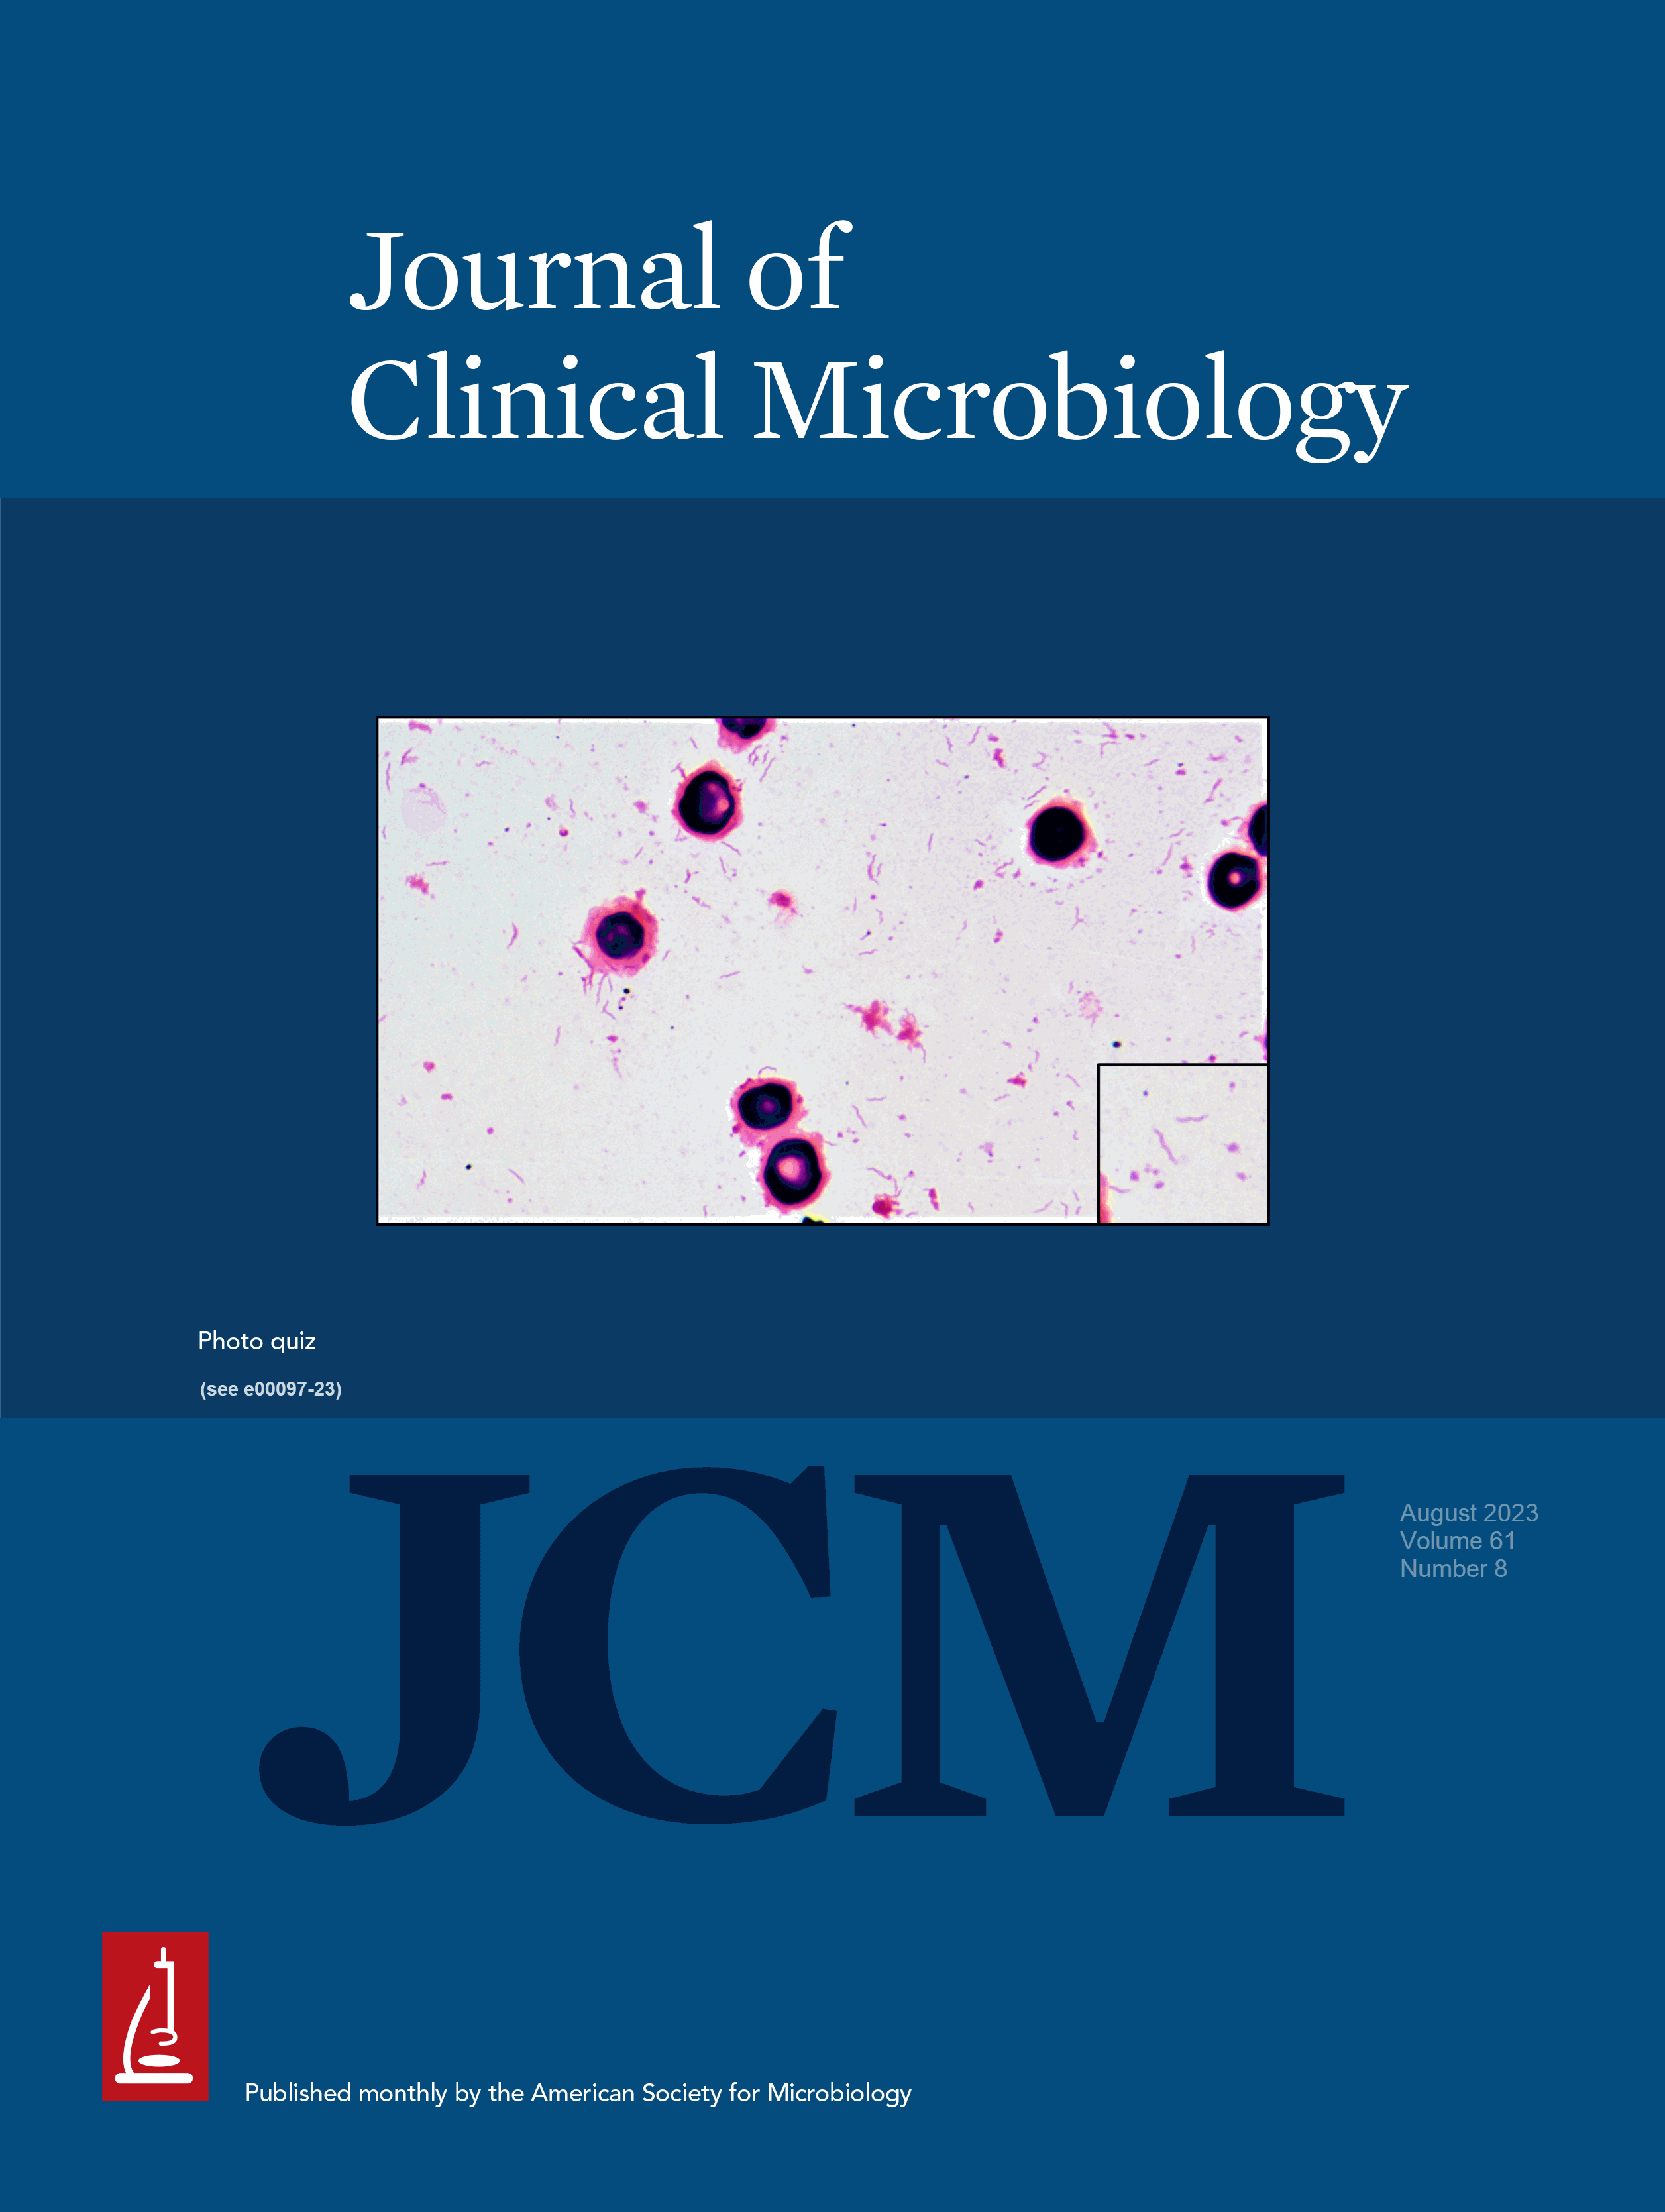 Performance and Hypothetical Impact on Joint Infection Management of the BioFire Joint Infection Panel: a Retrospective Analysis